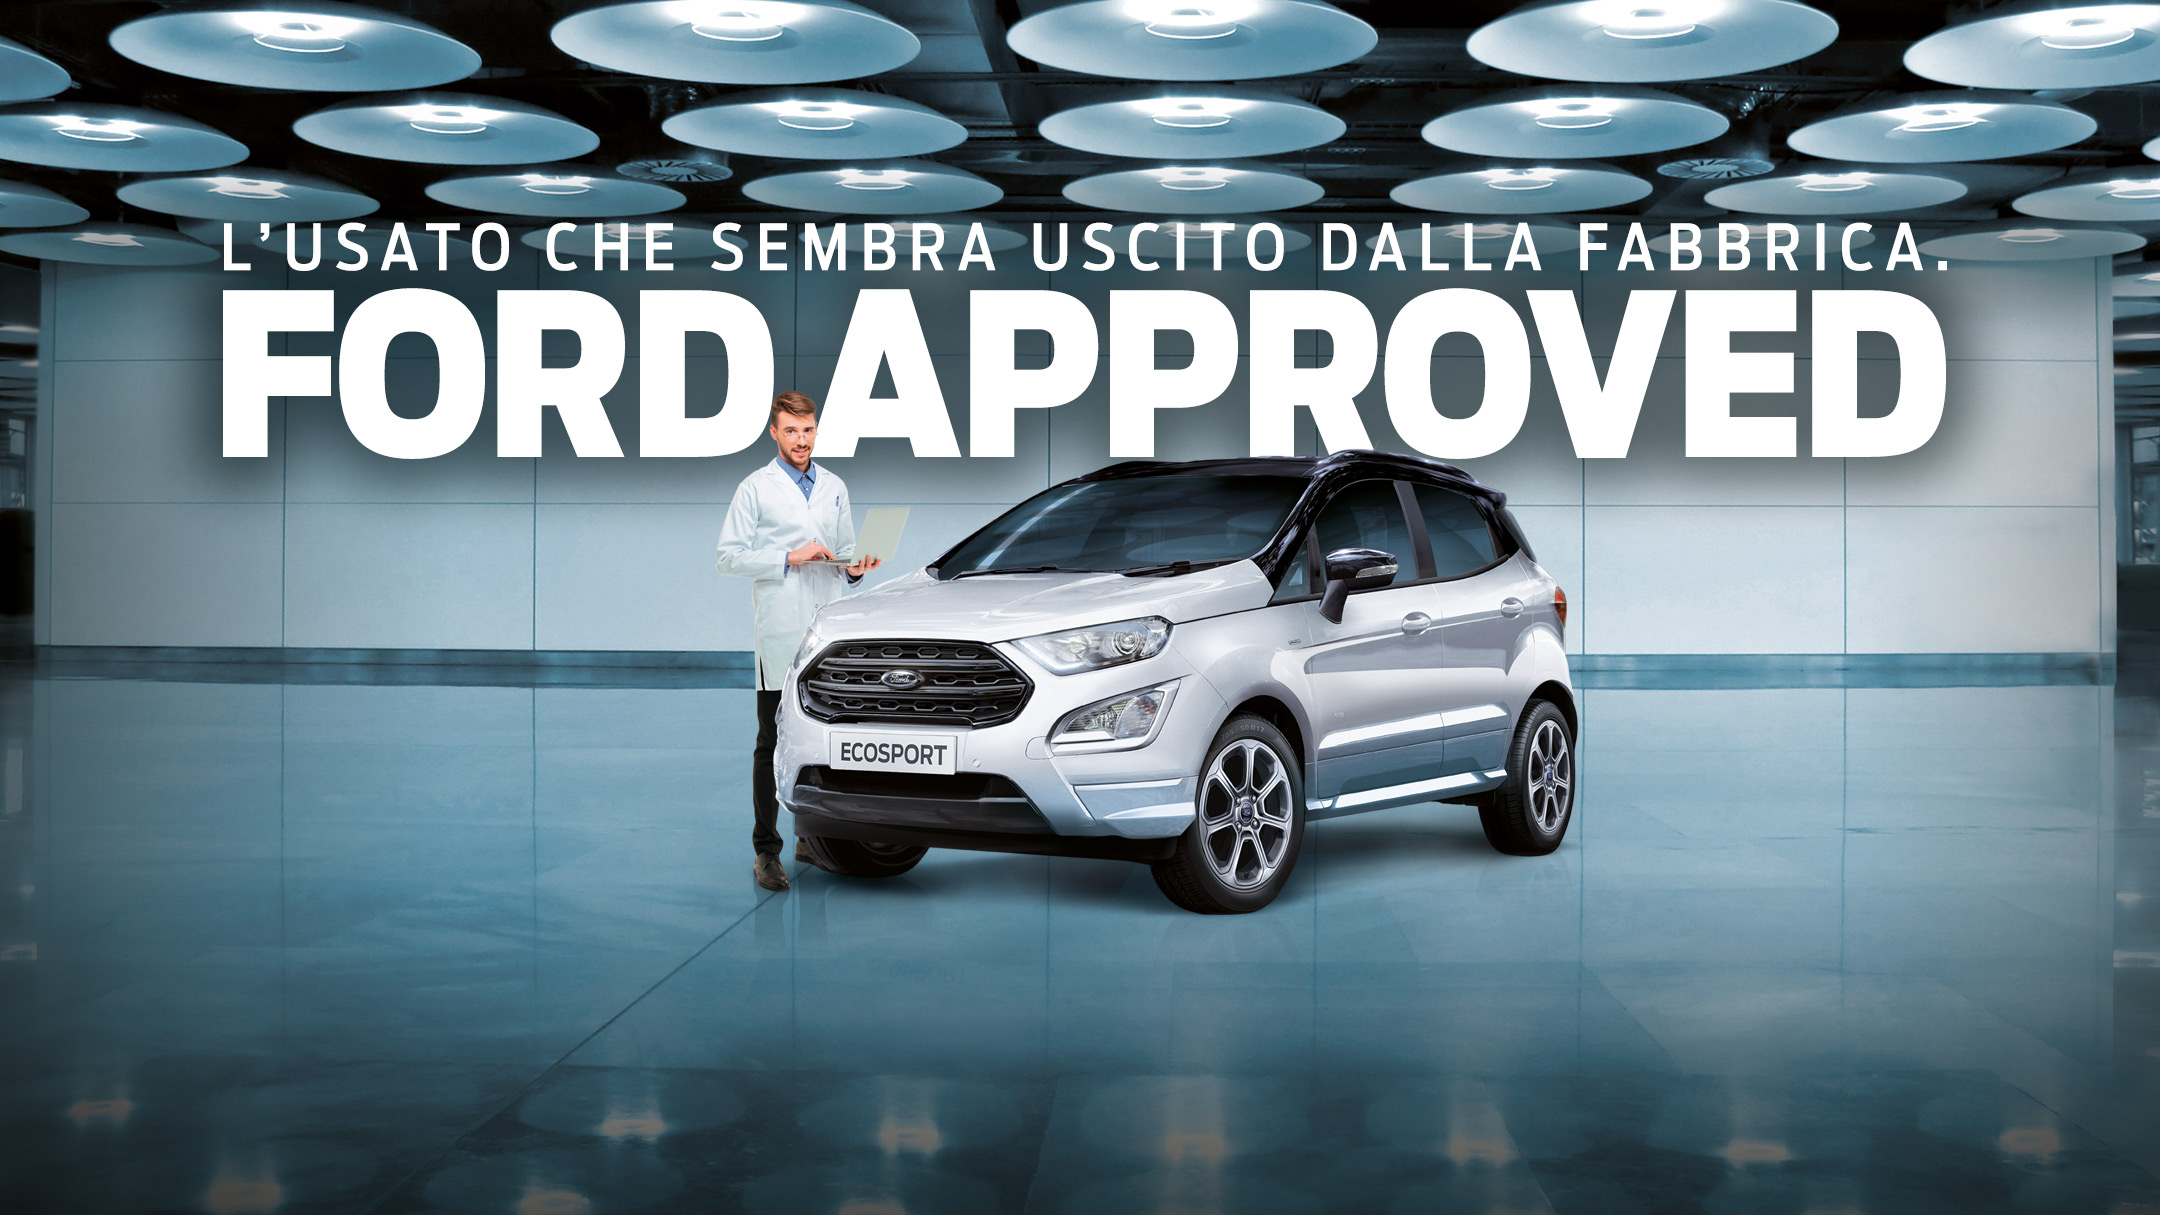 Ford Approved Ecosport Monza Milano